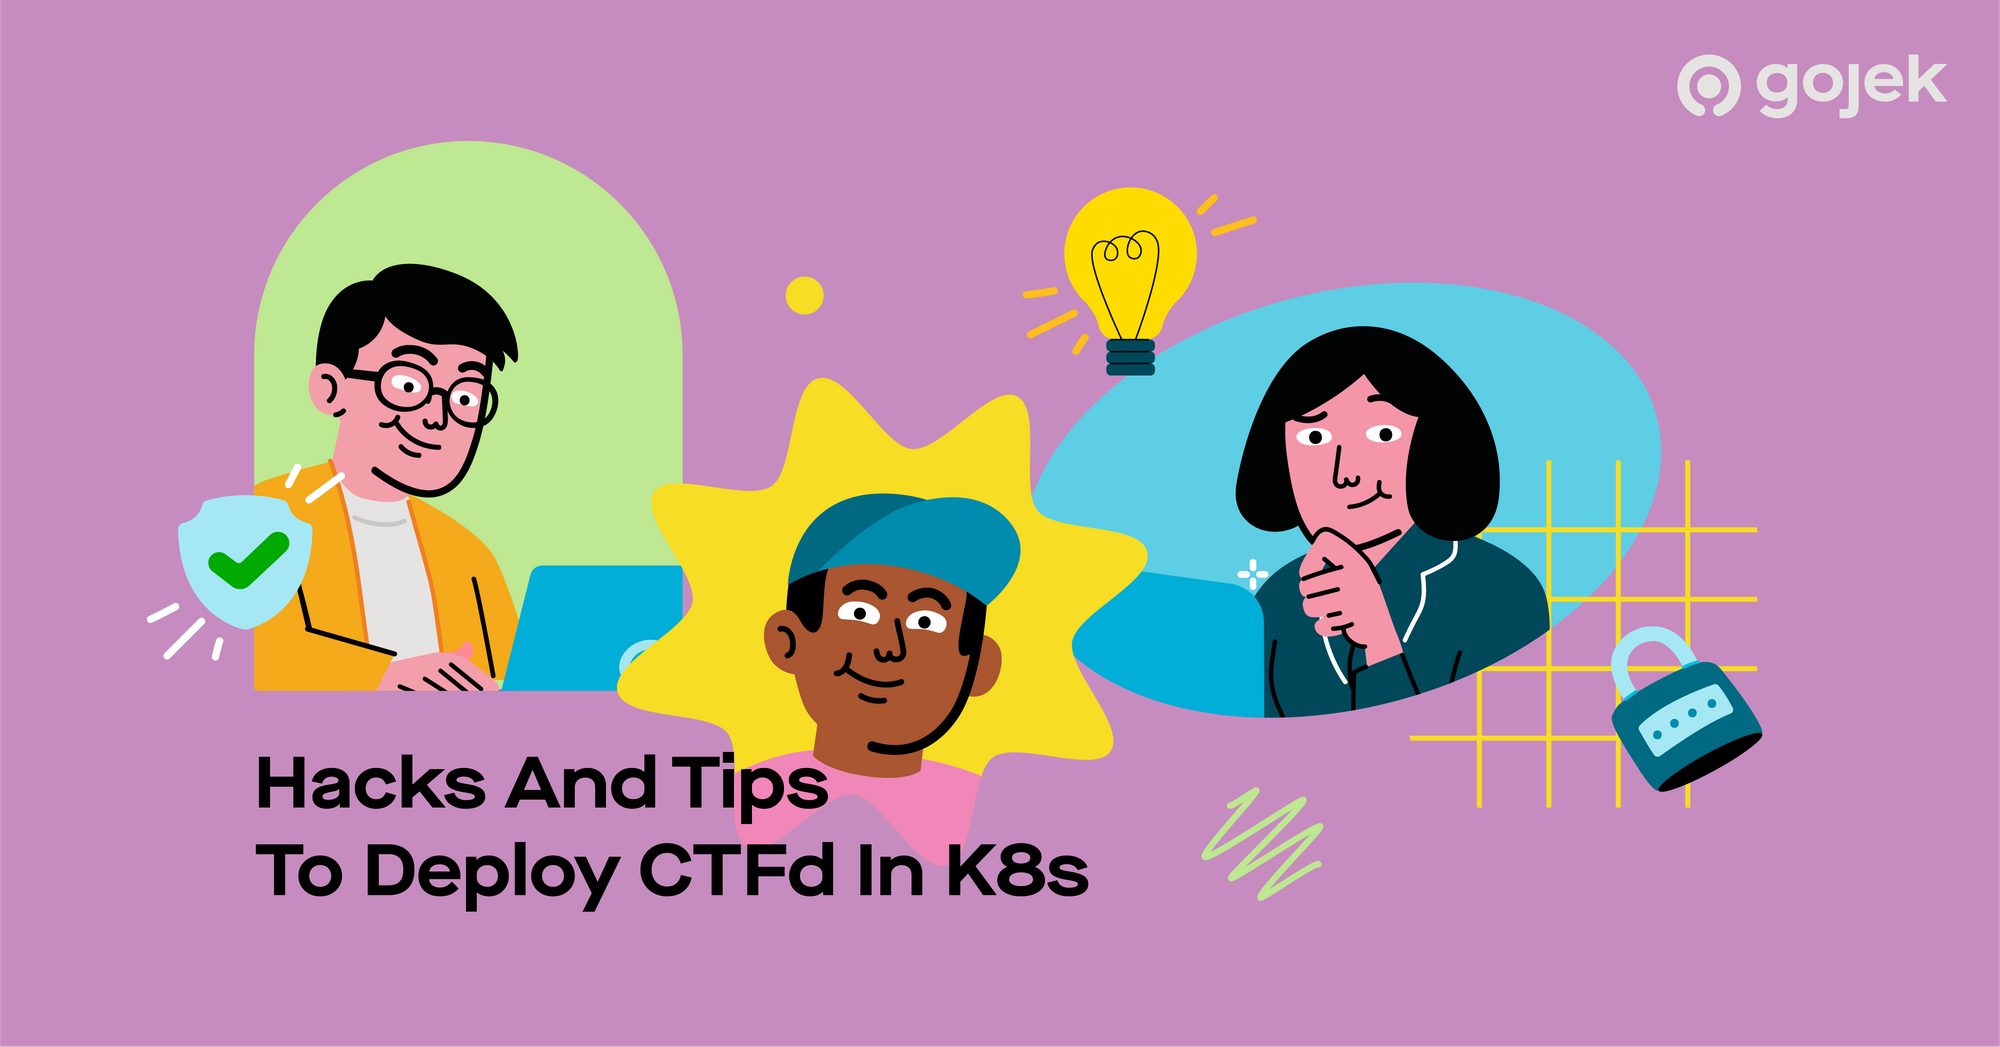 Hacks And Tips To Deploy CTFd In K8s